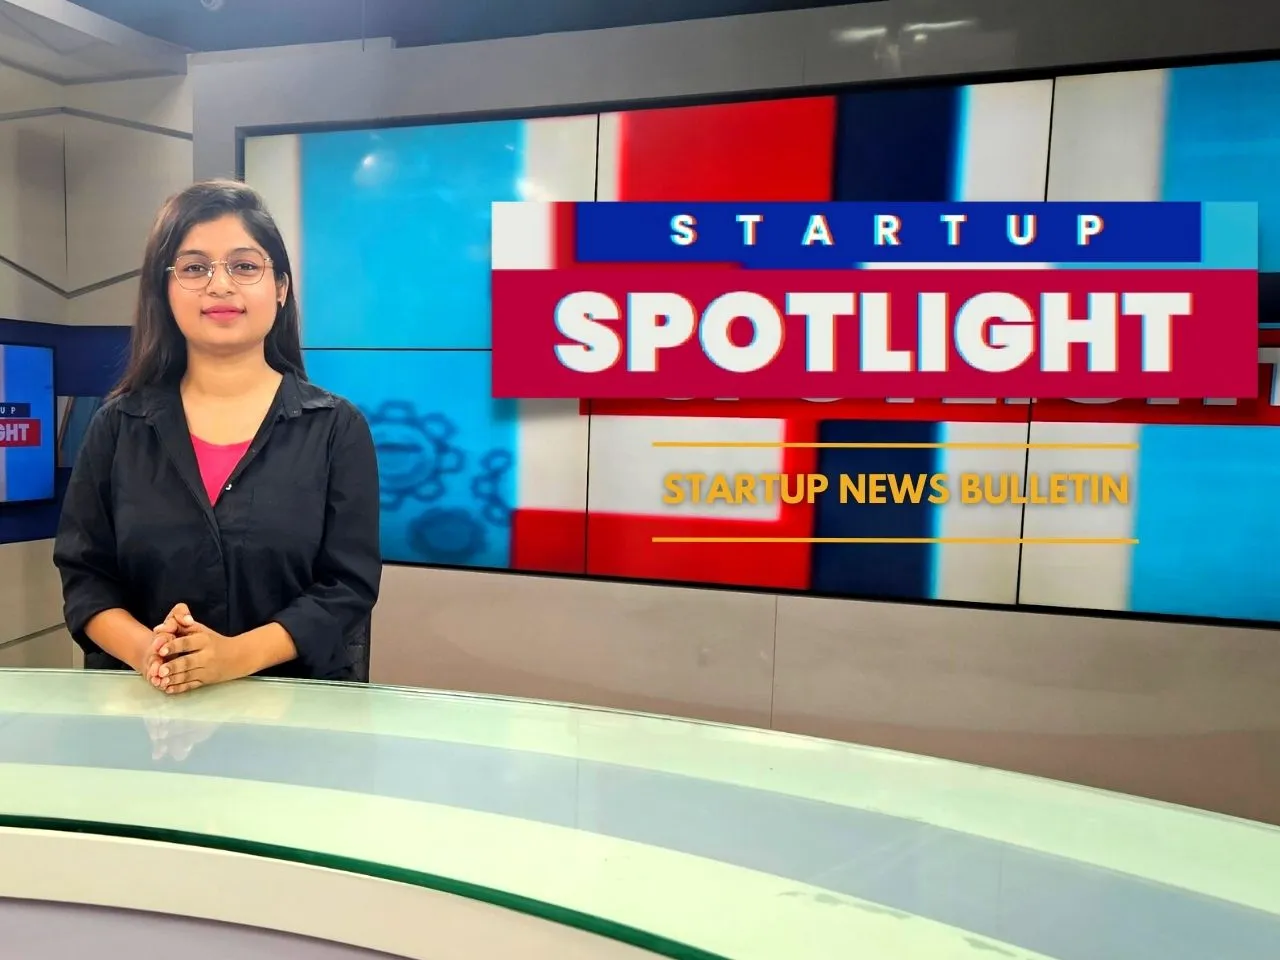 Startup Spotlight: Tax relief for Startups, Layoffs in Startups & More